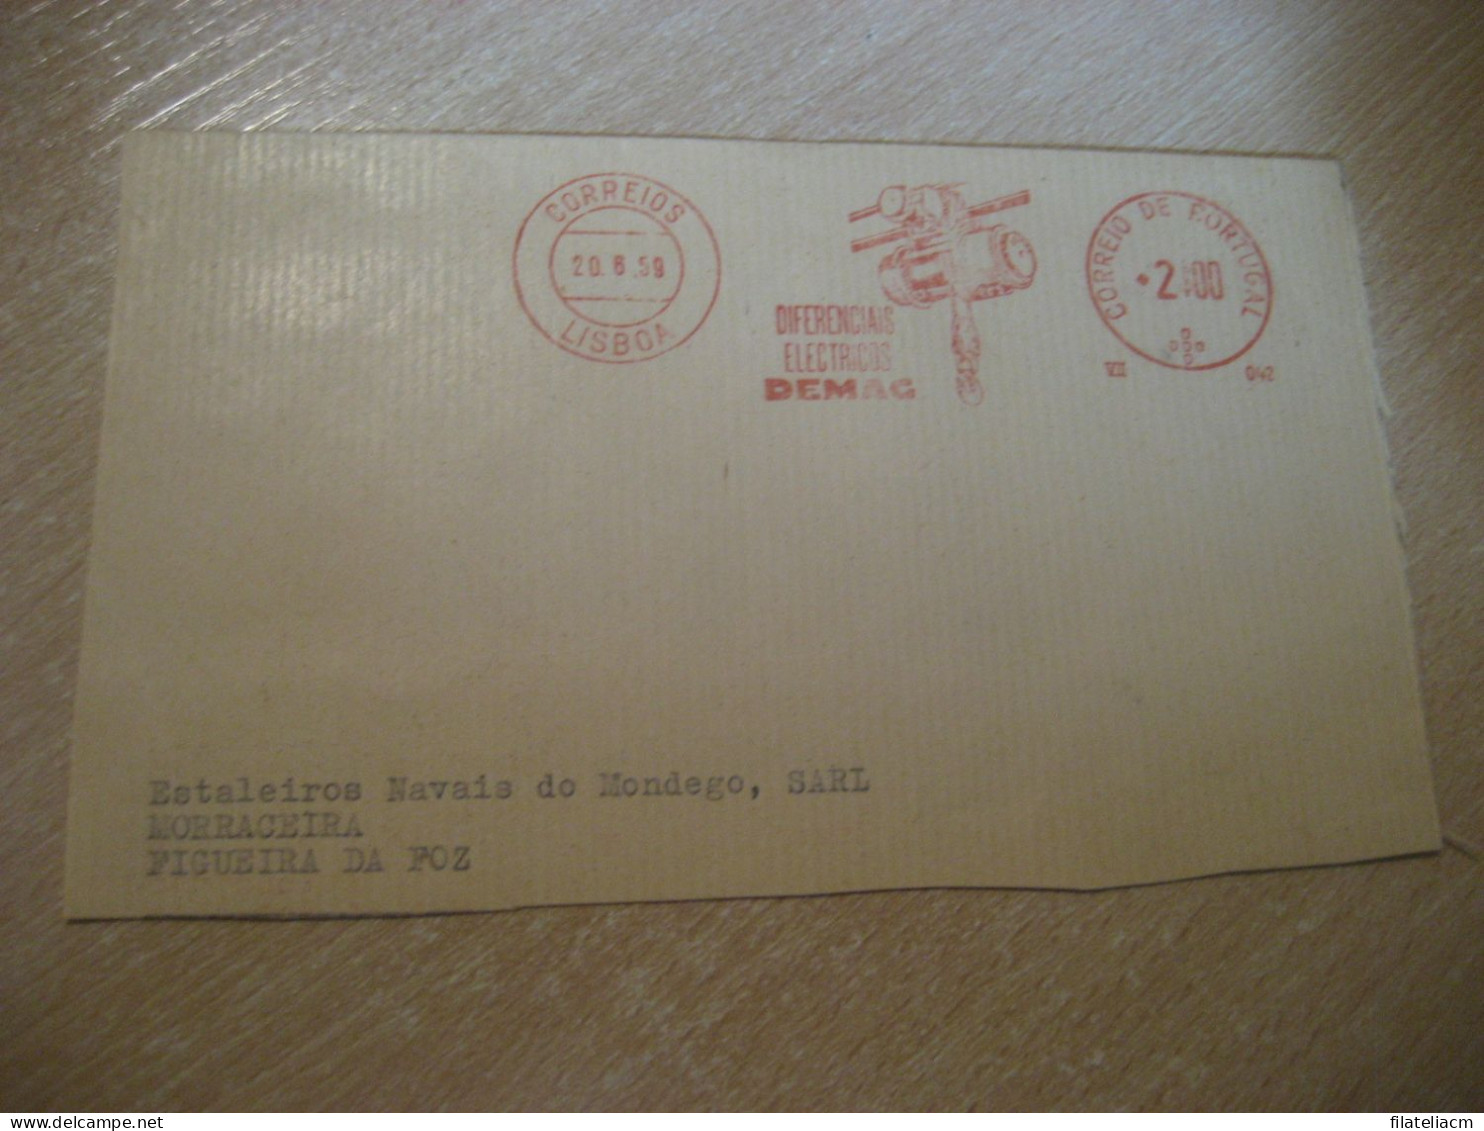 LISBOA 1959 To Figueira Da Foz DEMAC Diferenciais Electricos Physics Meter Mail Cancel Cut Cuted Cover PORTUGAL - Covers & Documents